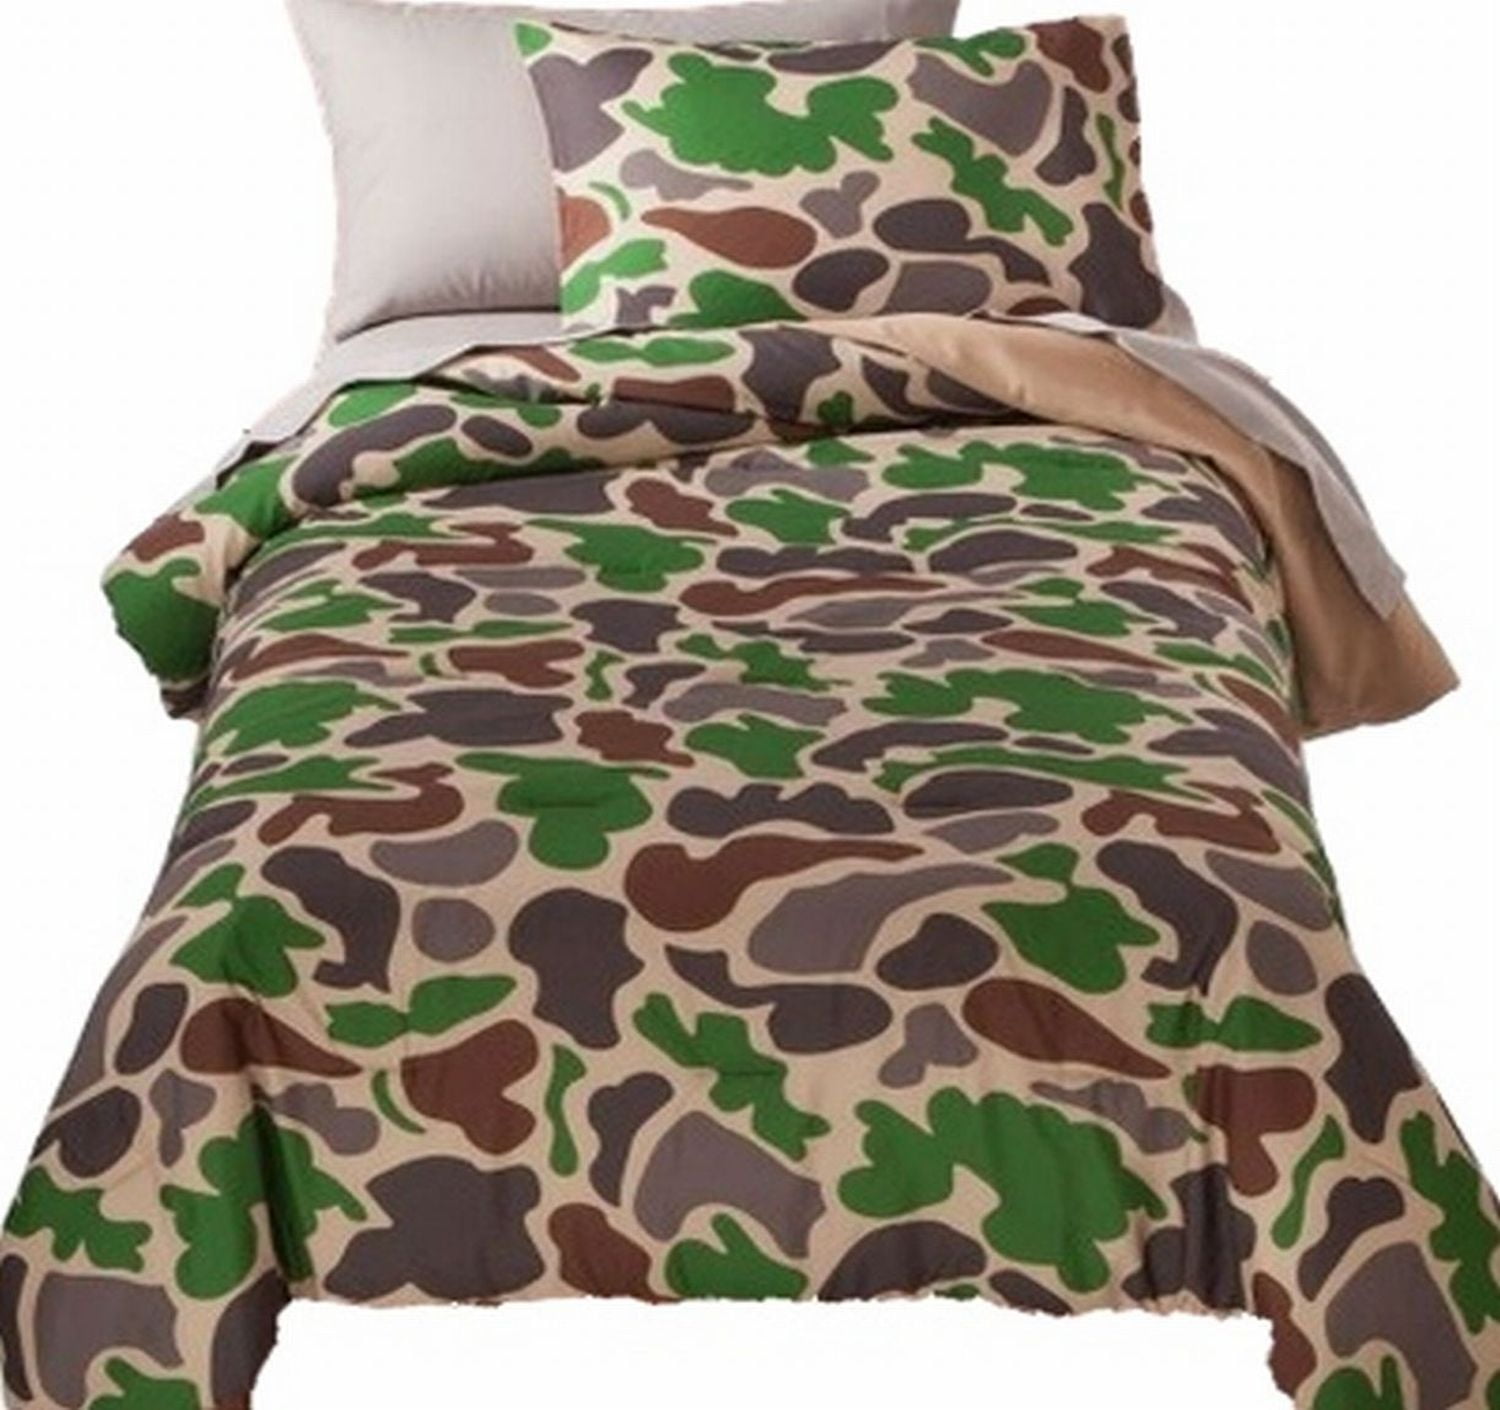 Twin Full Bed Bag Green Camo Camouflage Reversible 7 pc Comforter Sheet Set 